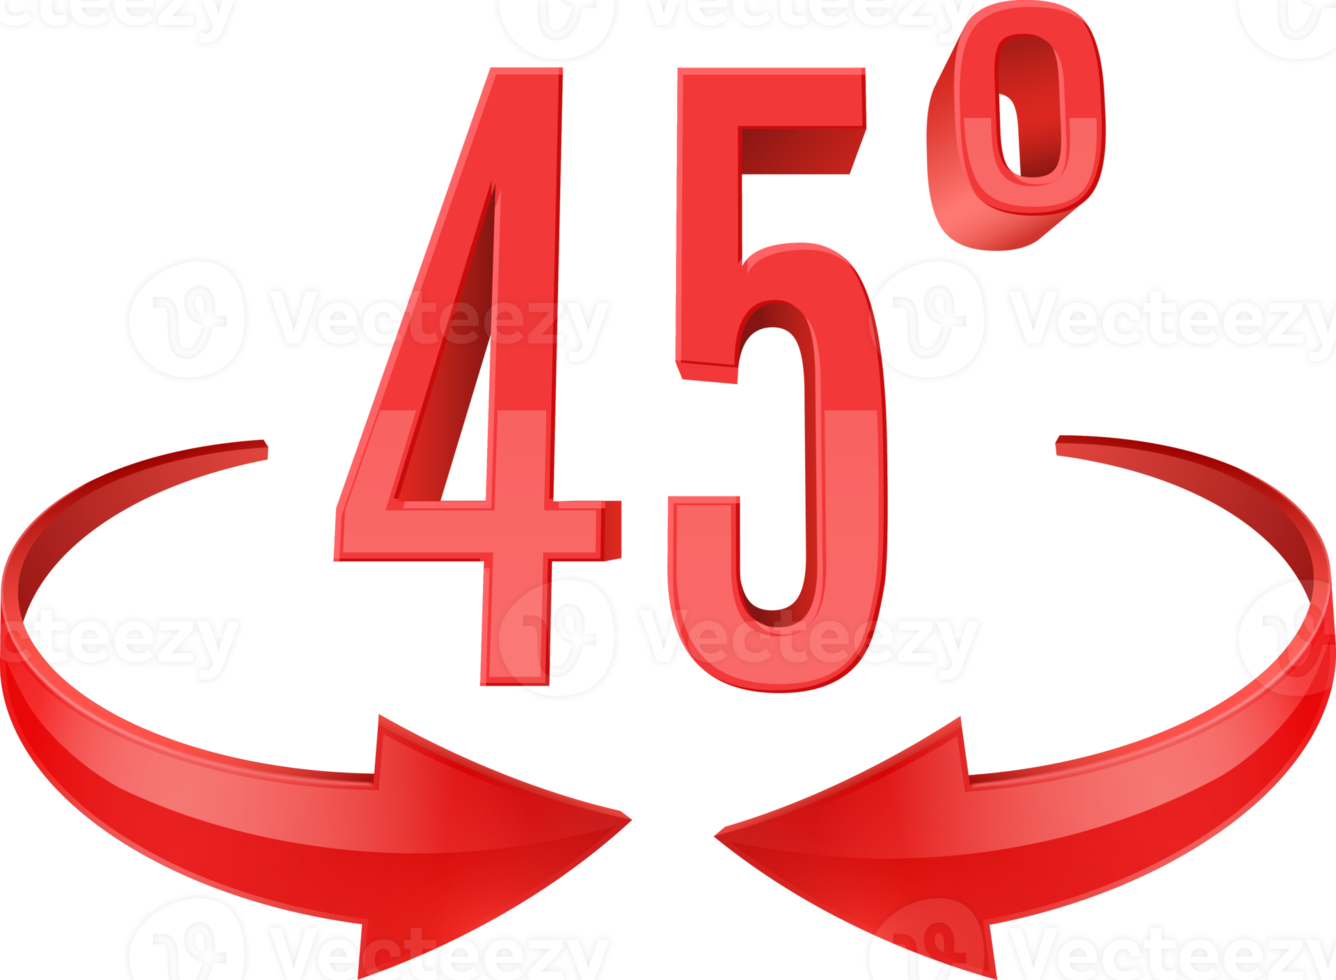 forty five degree rotation icon png